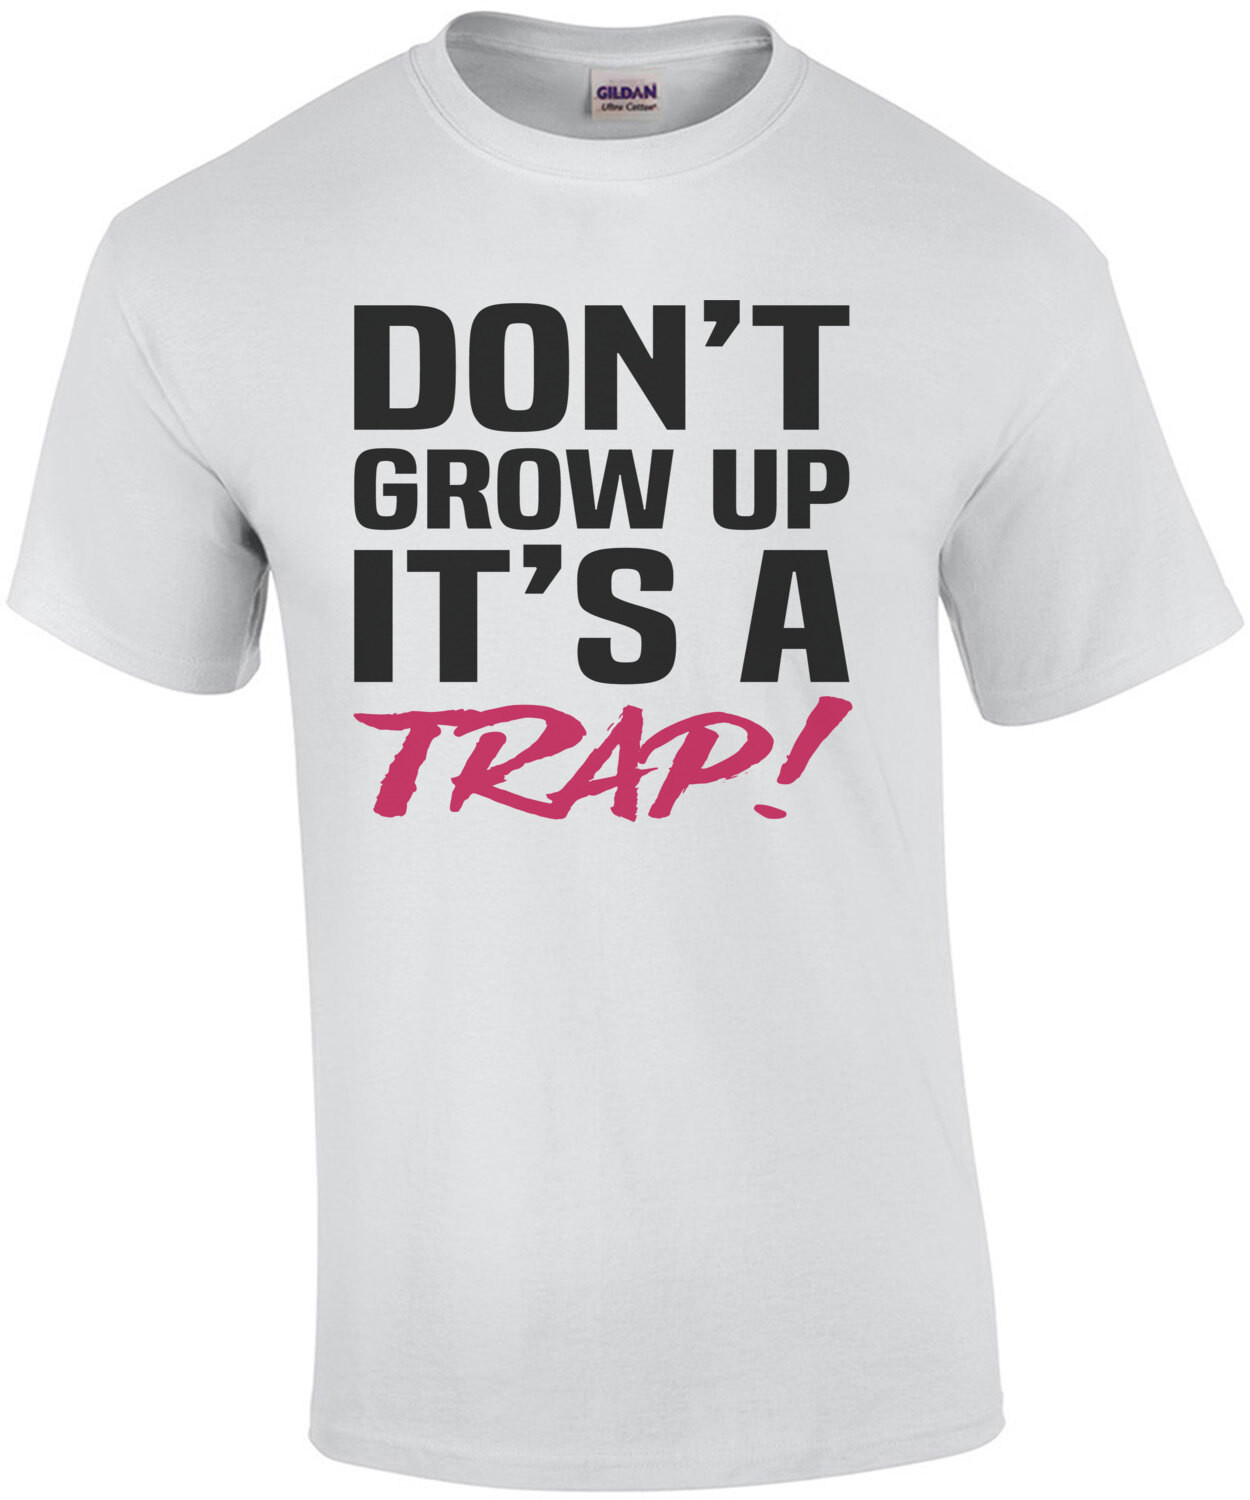 Don't grow up - it's a trap - funny t-shirt